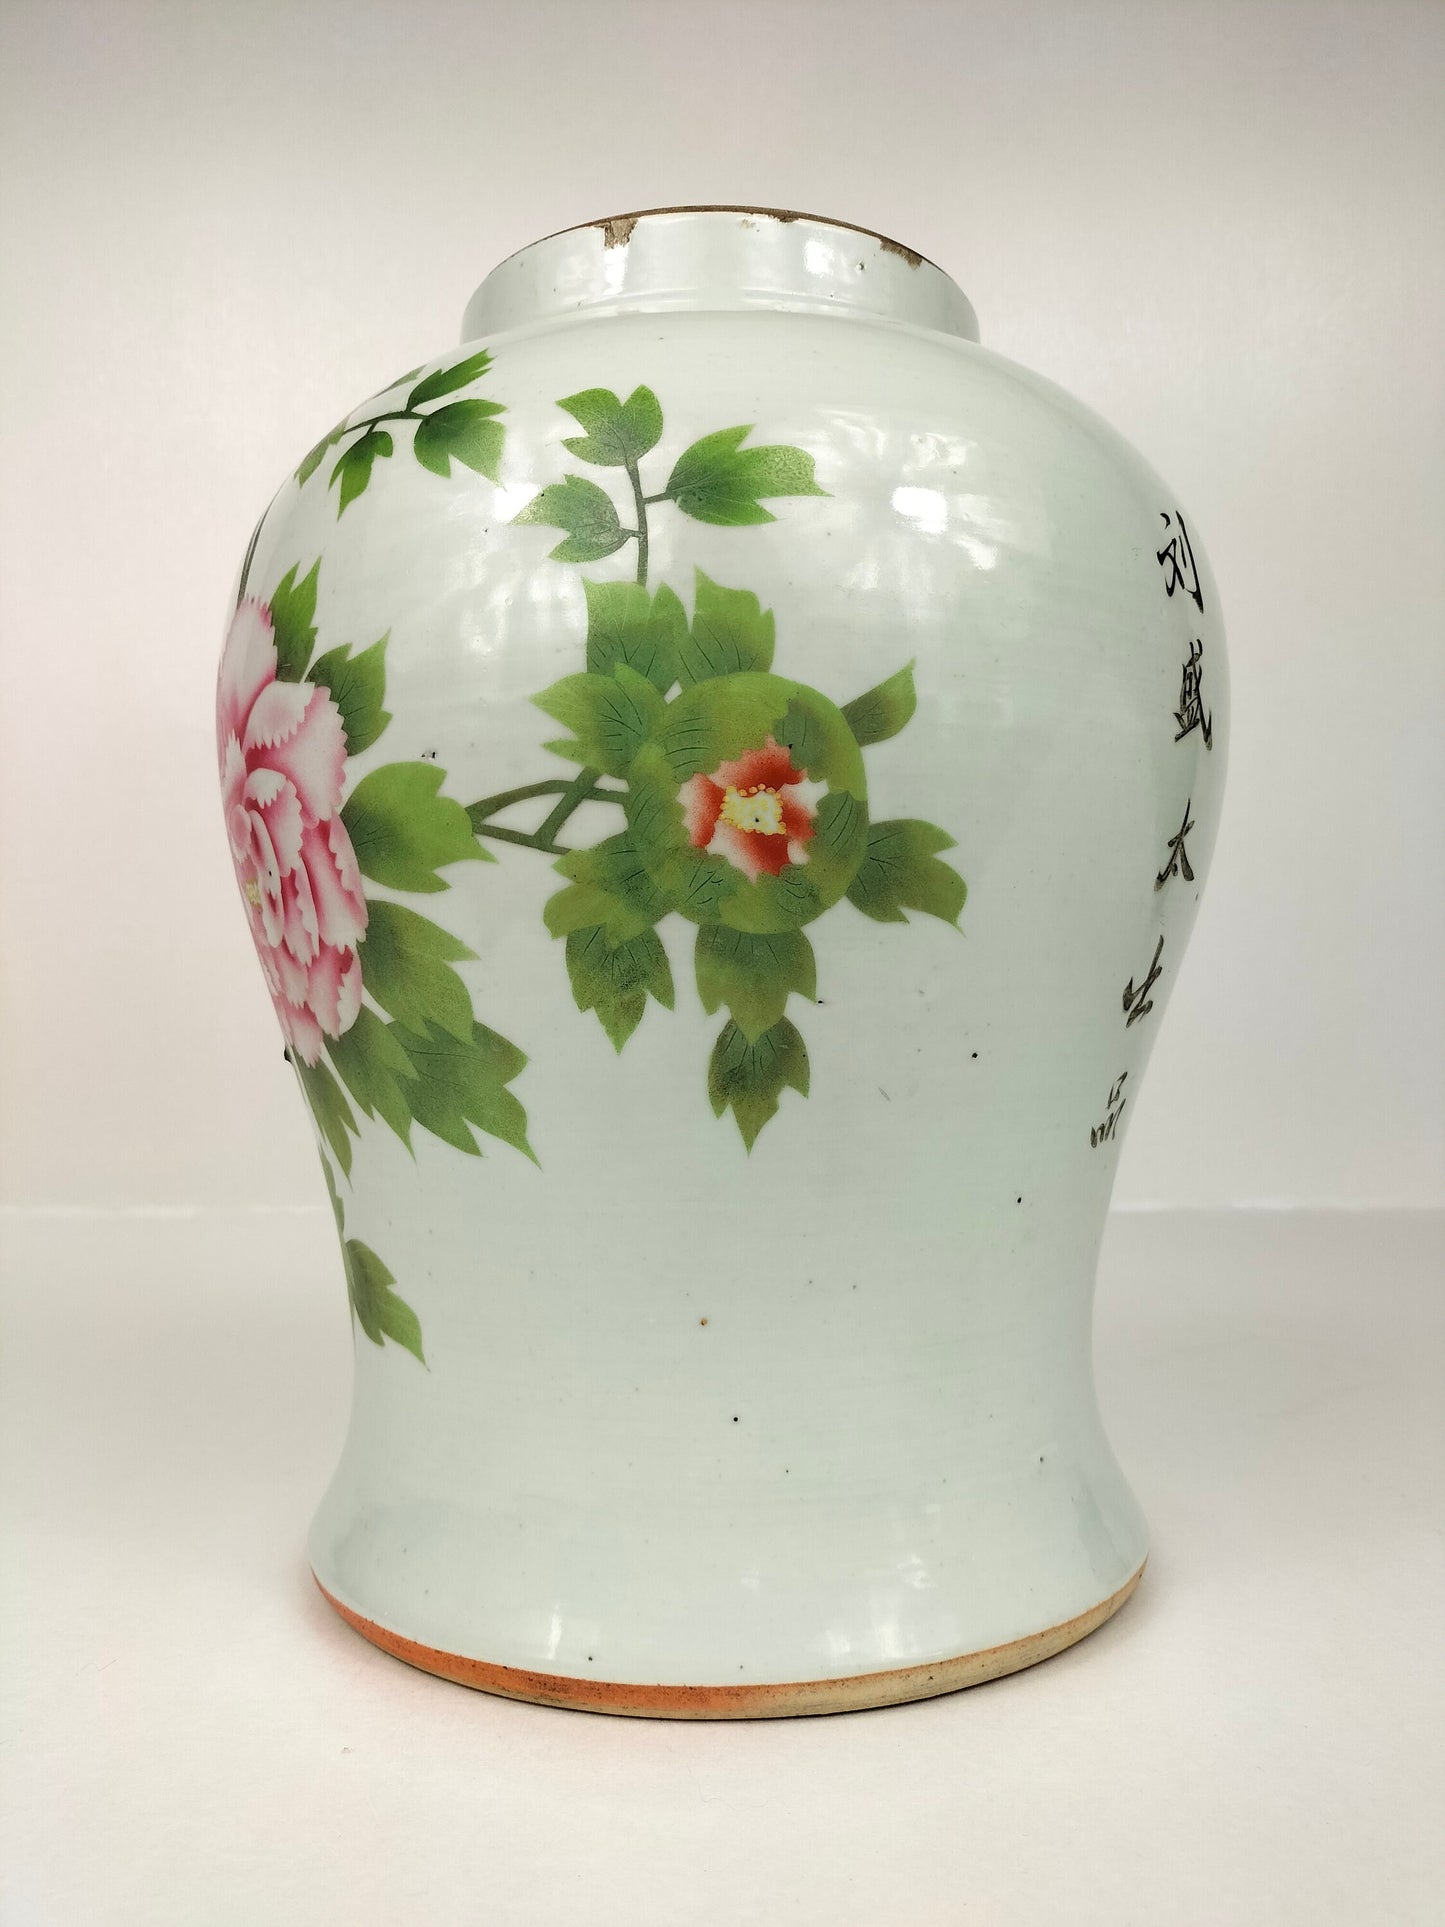 Antique Chinese famille rose temple vase decorated with peonies // Republic Period (1912-1949)